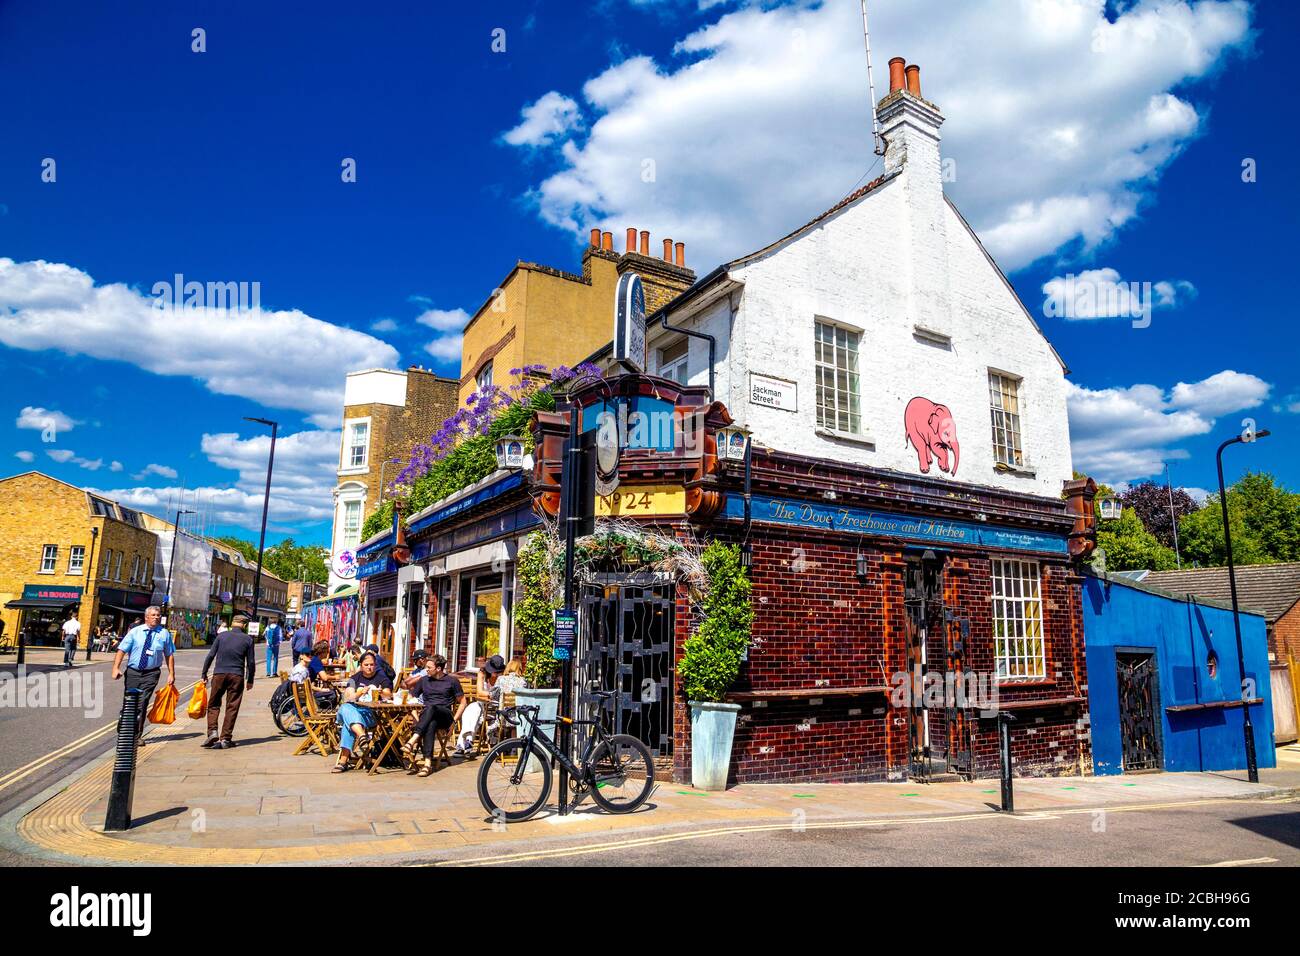 People drinking outside The Dove pub in the summer in Broadway Market, London, UK Stock Photo